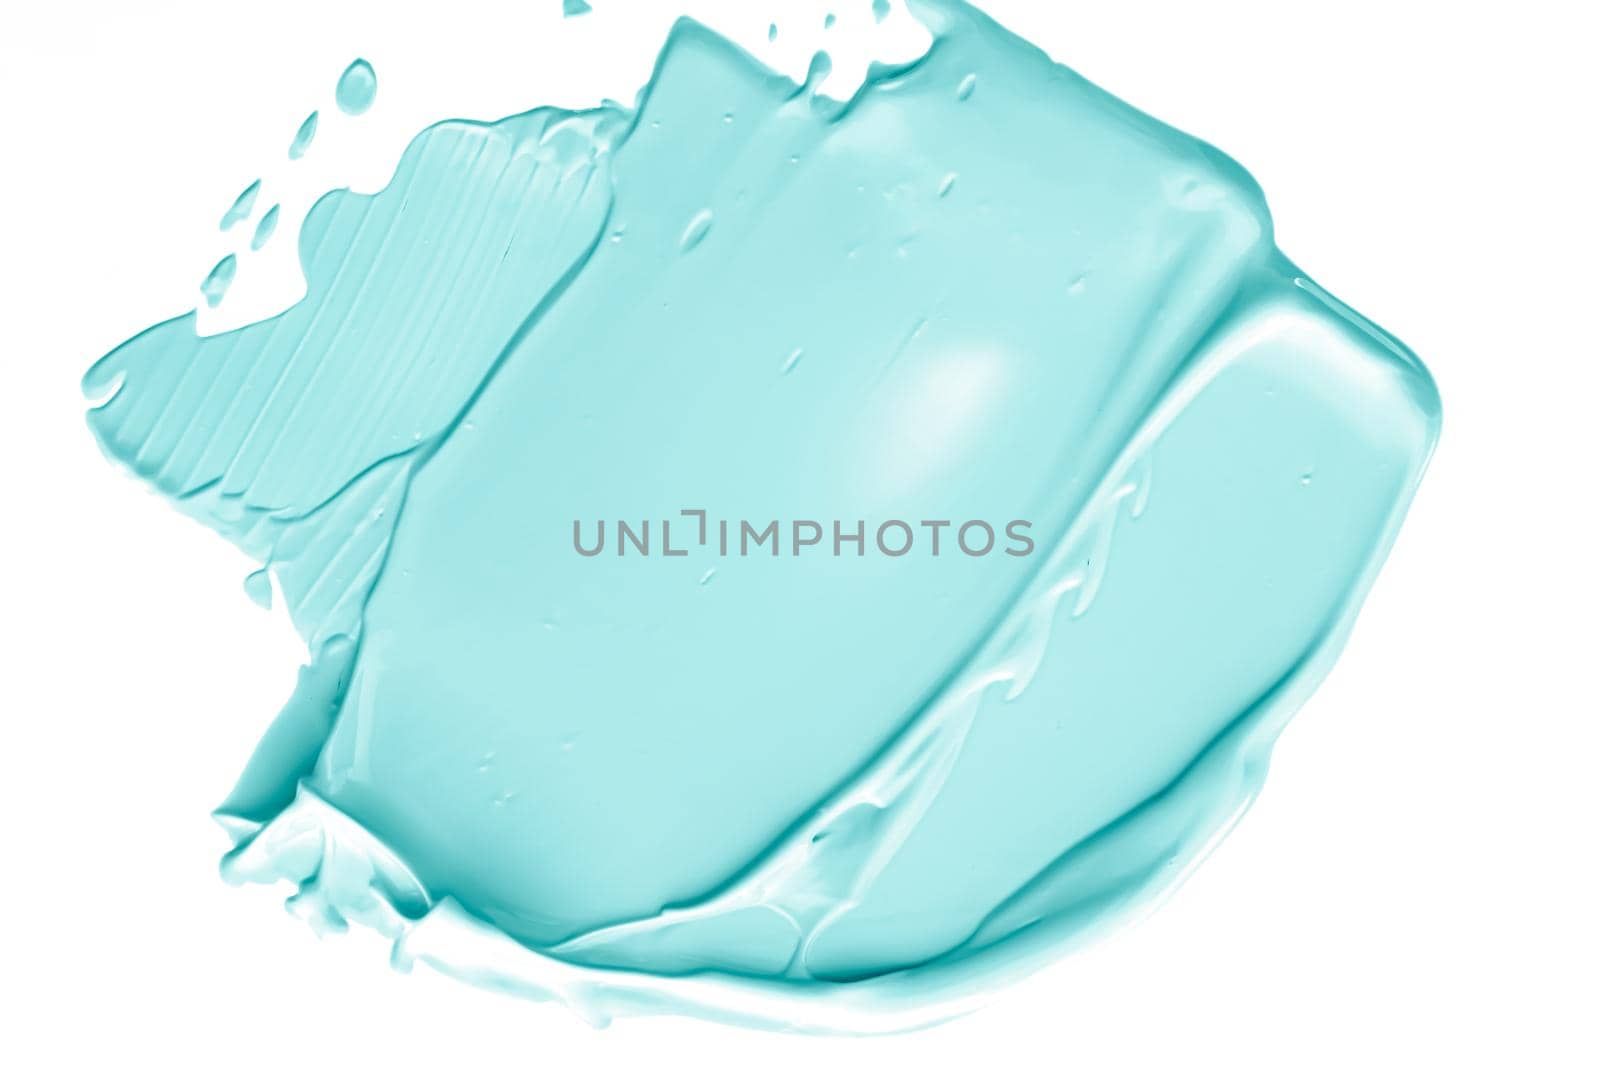 Pastel mint beauty swatch, skincare and makeup cosmetic product sample texture isolated on white background, make-up smudge, cream cosmetics smear or paint brush stroke closeup